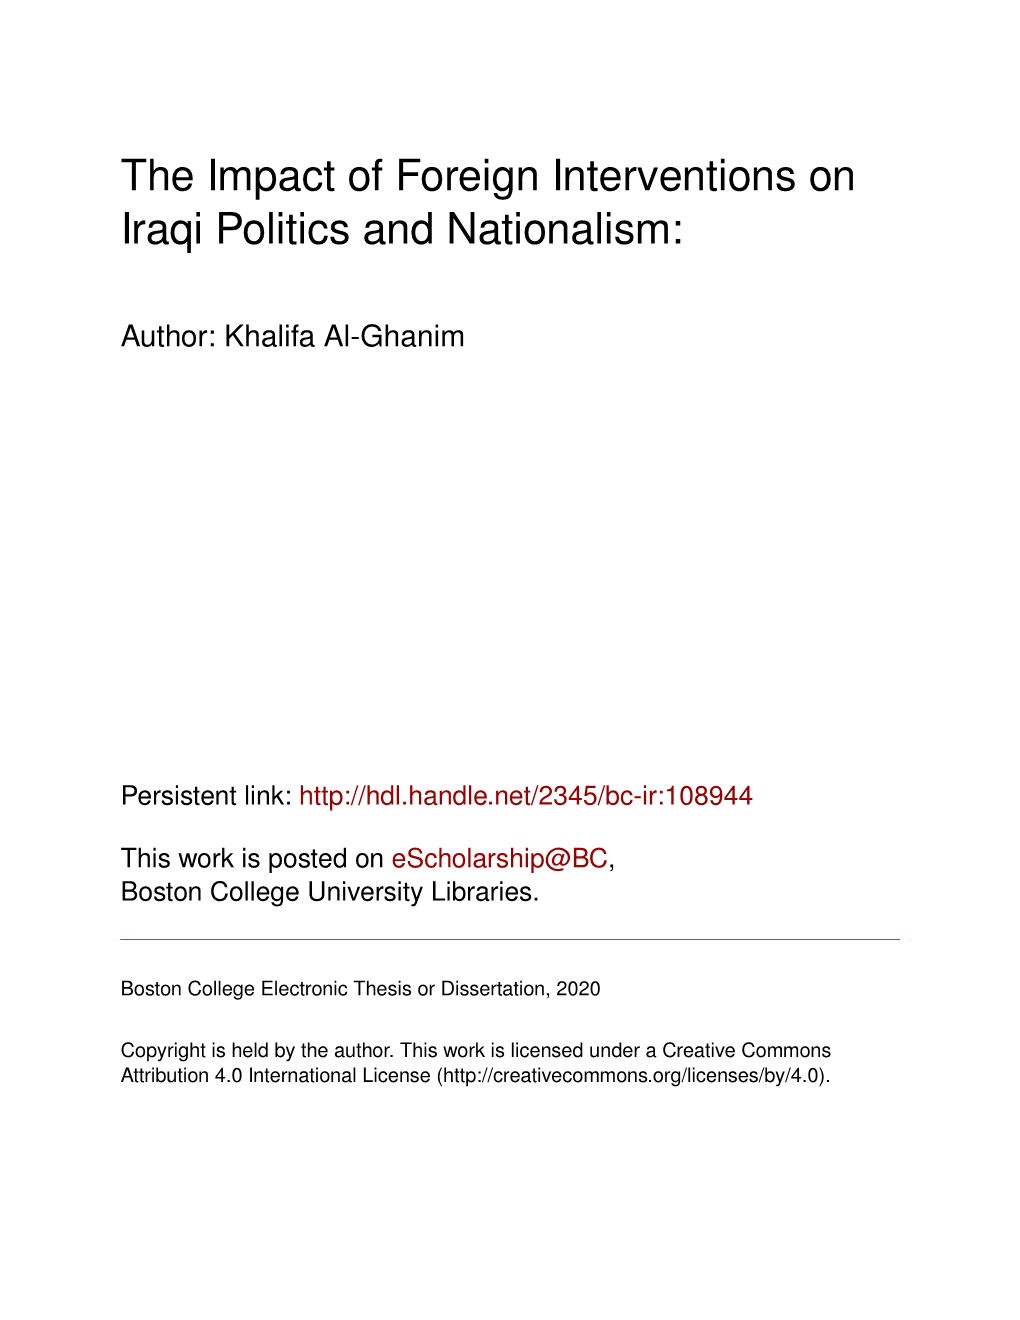 The Impact of Foreign Interventions on Iraqi Politics and Nationalism